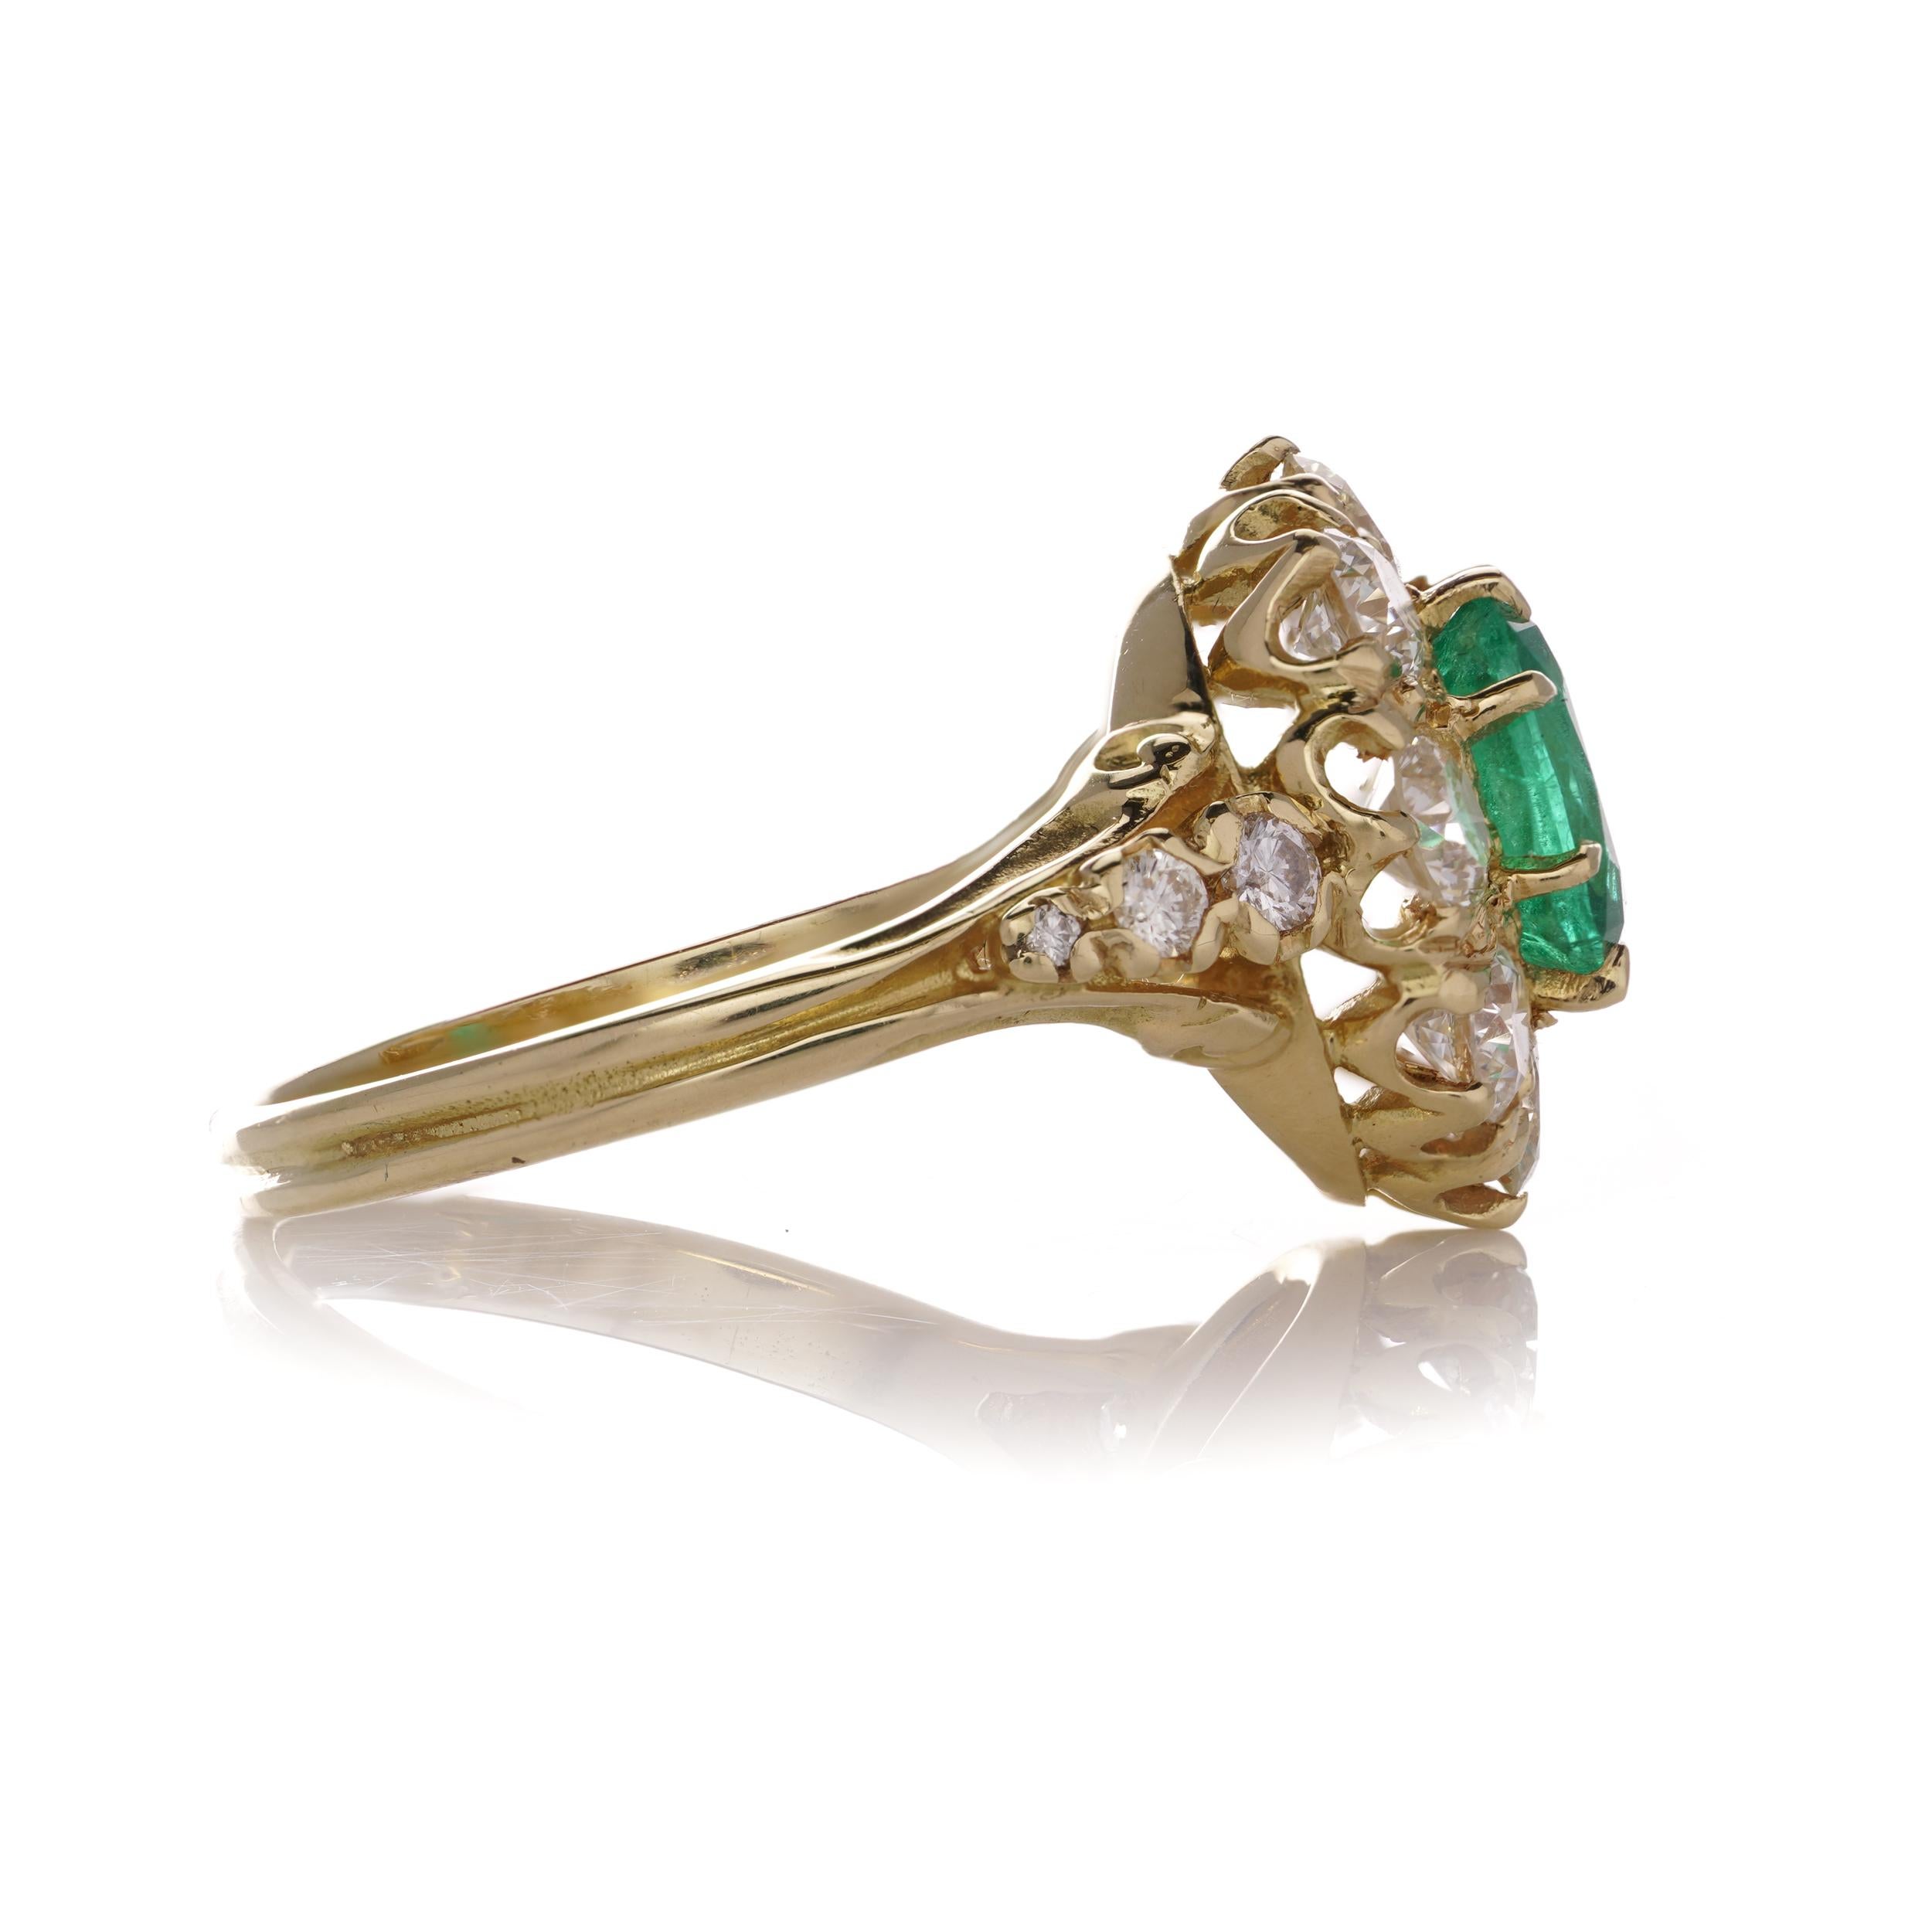 18kt.yellow gold 1.10 carat Oval Emerald Cluster ladies ring, surrounded by round 2.14 carats of brilliant diamonds. 
Hallmarked for  18kt. gold.

Dimensions - 
Ring size: 2.6 x 2.1 x 1.4 cm  
Finger Size (UK) = N 1/2 (US) = 7.25 (EU) =55 1/2